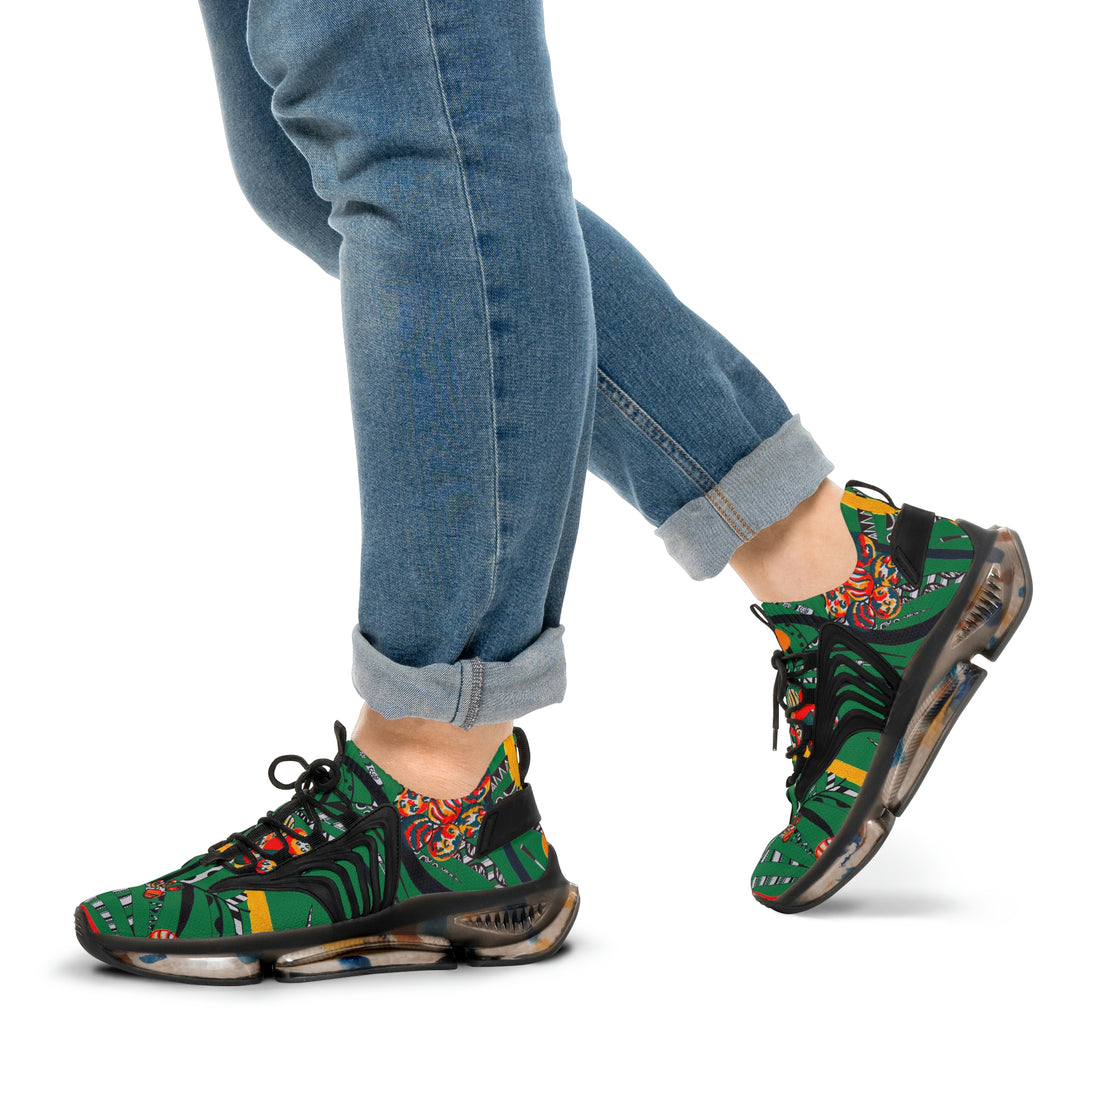 emerald men's floral and animal print mesh knit sneakers